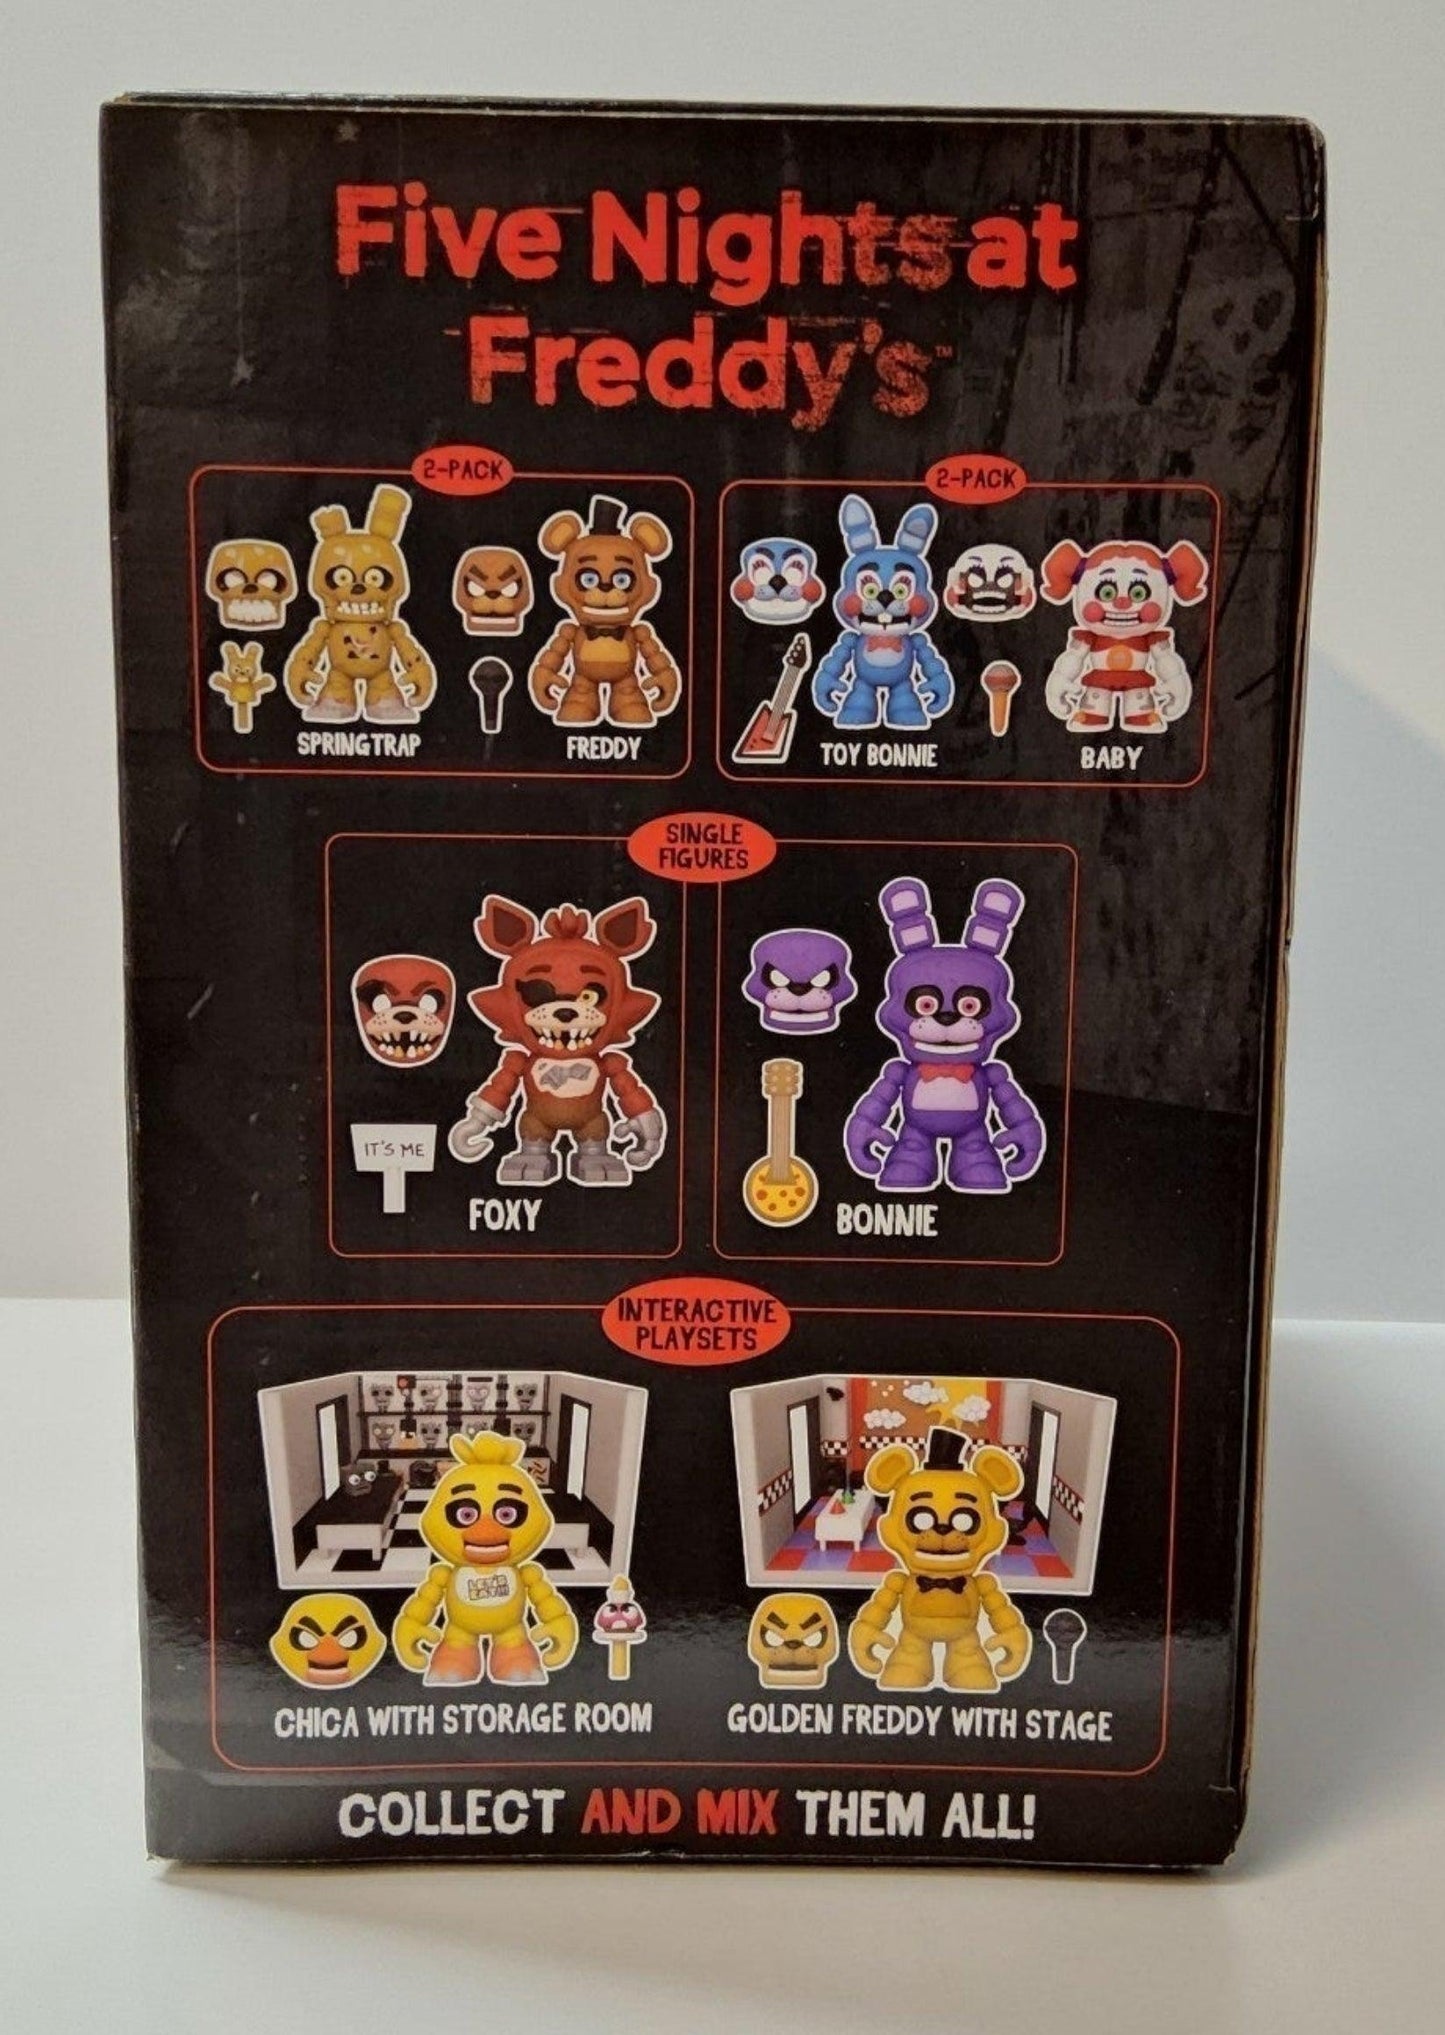 Funko Snaps! Golden Freddy With Stage Playset - Logan's Toy Chest